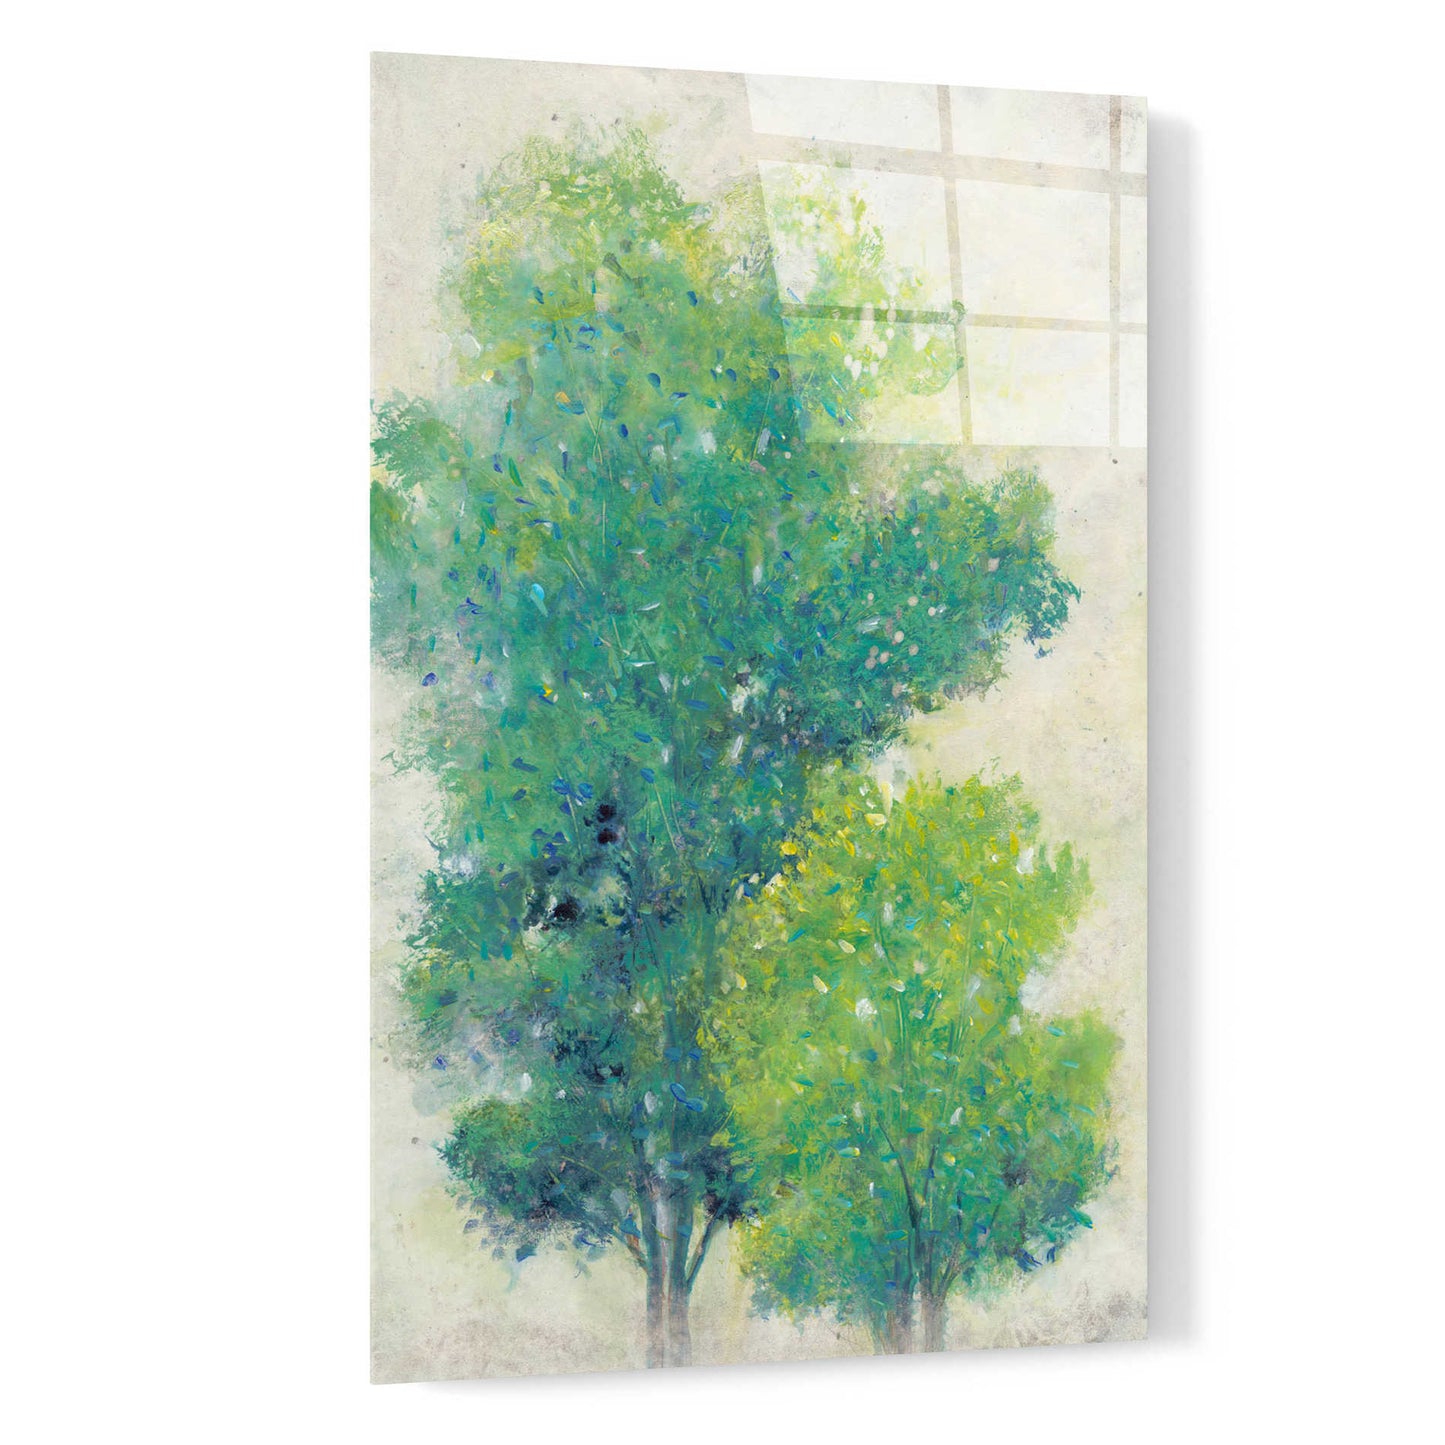 Epic Art 'A Pair of Trees I' by Tim O'Toole, Acrylic Glass Wall Art,16x24